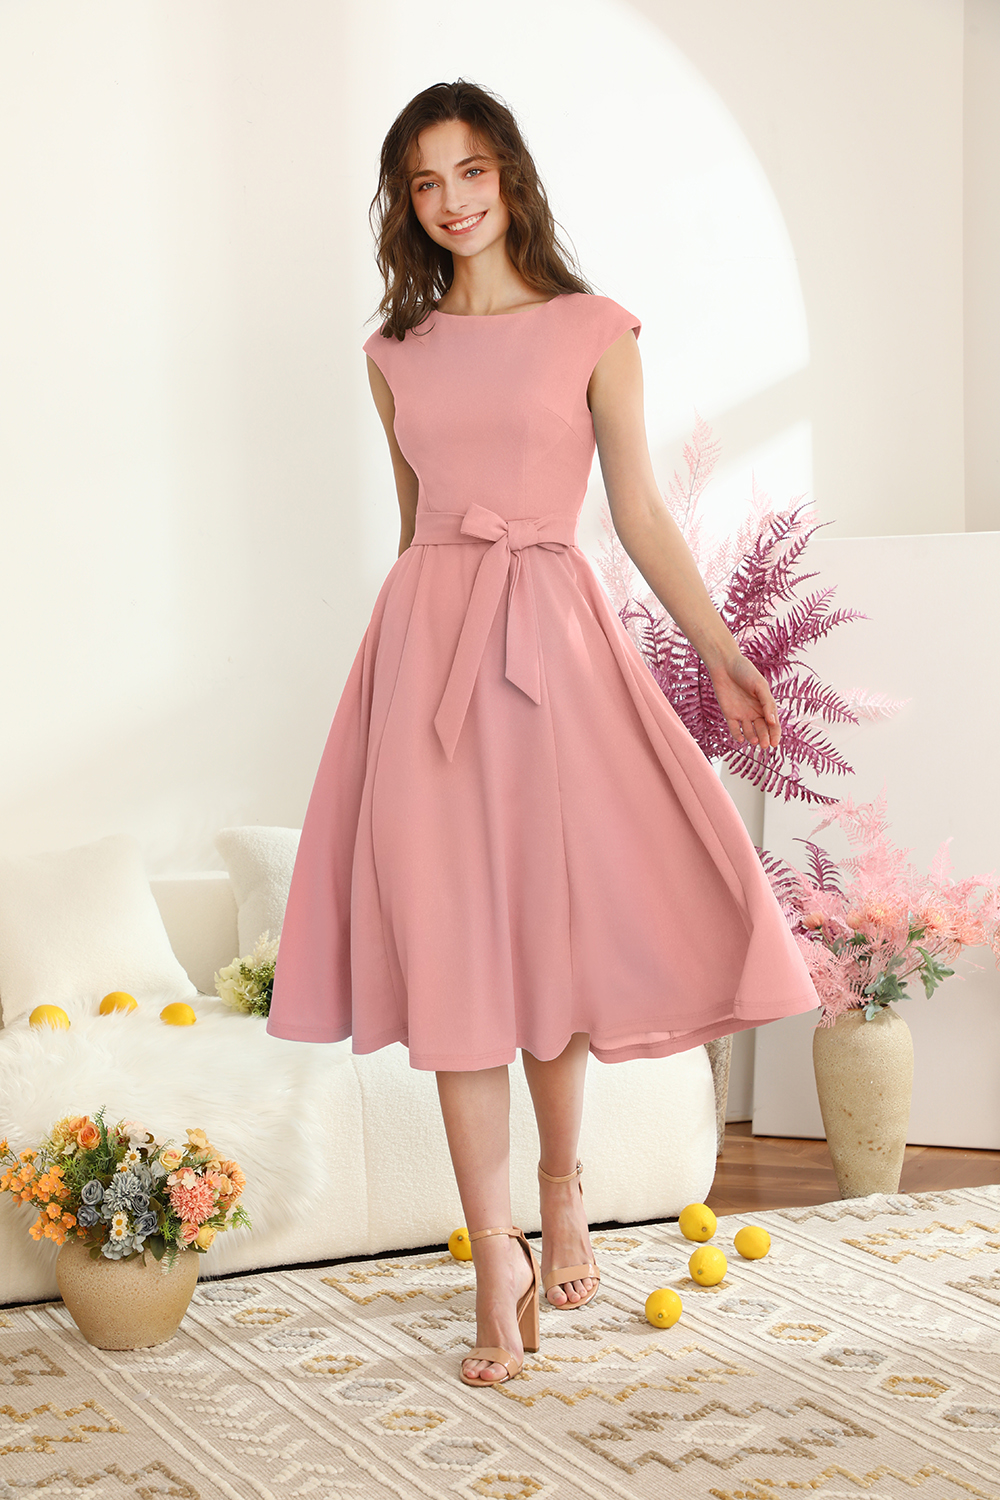 A-Line Knee-Length Dustyrose Cocktail Dress with Cap Sleeves, Vintage Style, Unique and Elegant